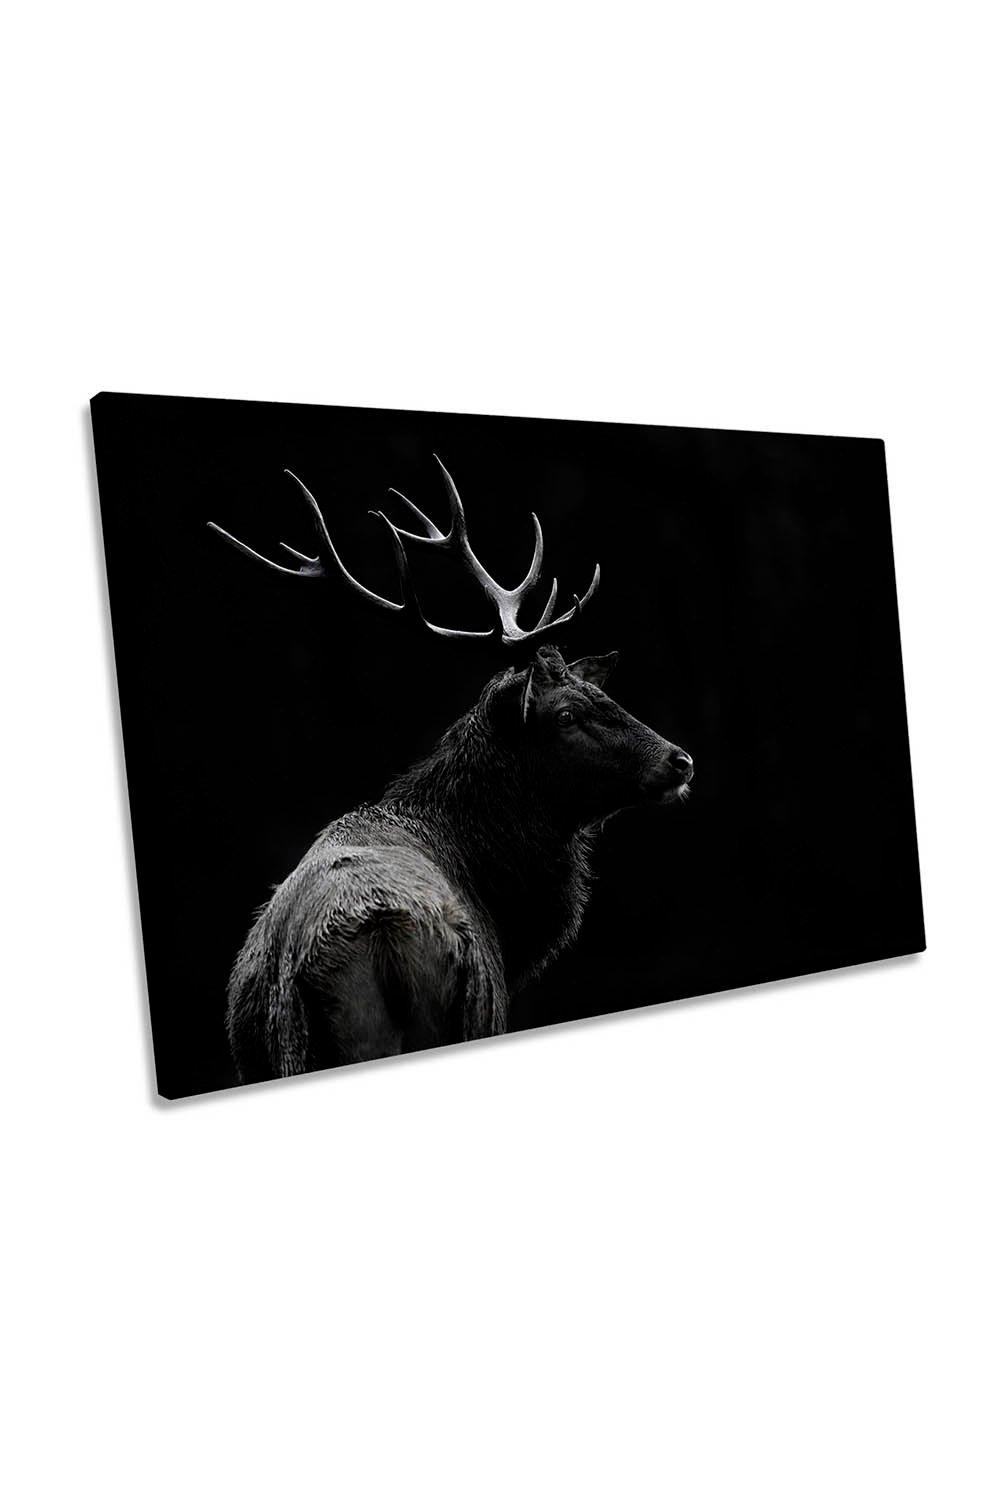 The Deer Soul Stag Wildlife Black Canvas Wall Art Picture Print